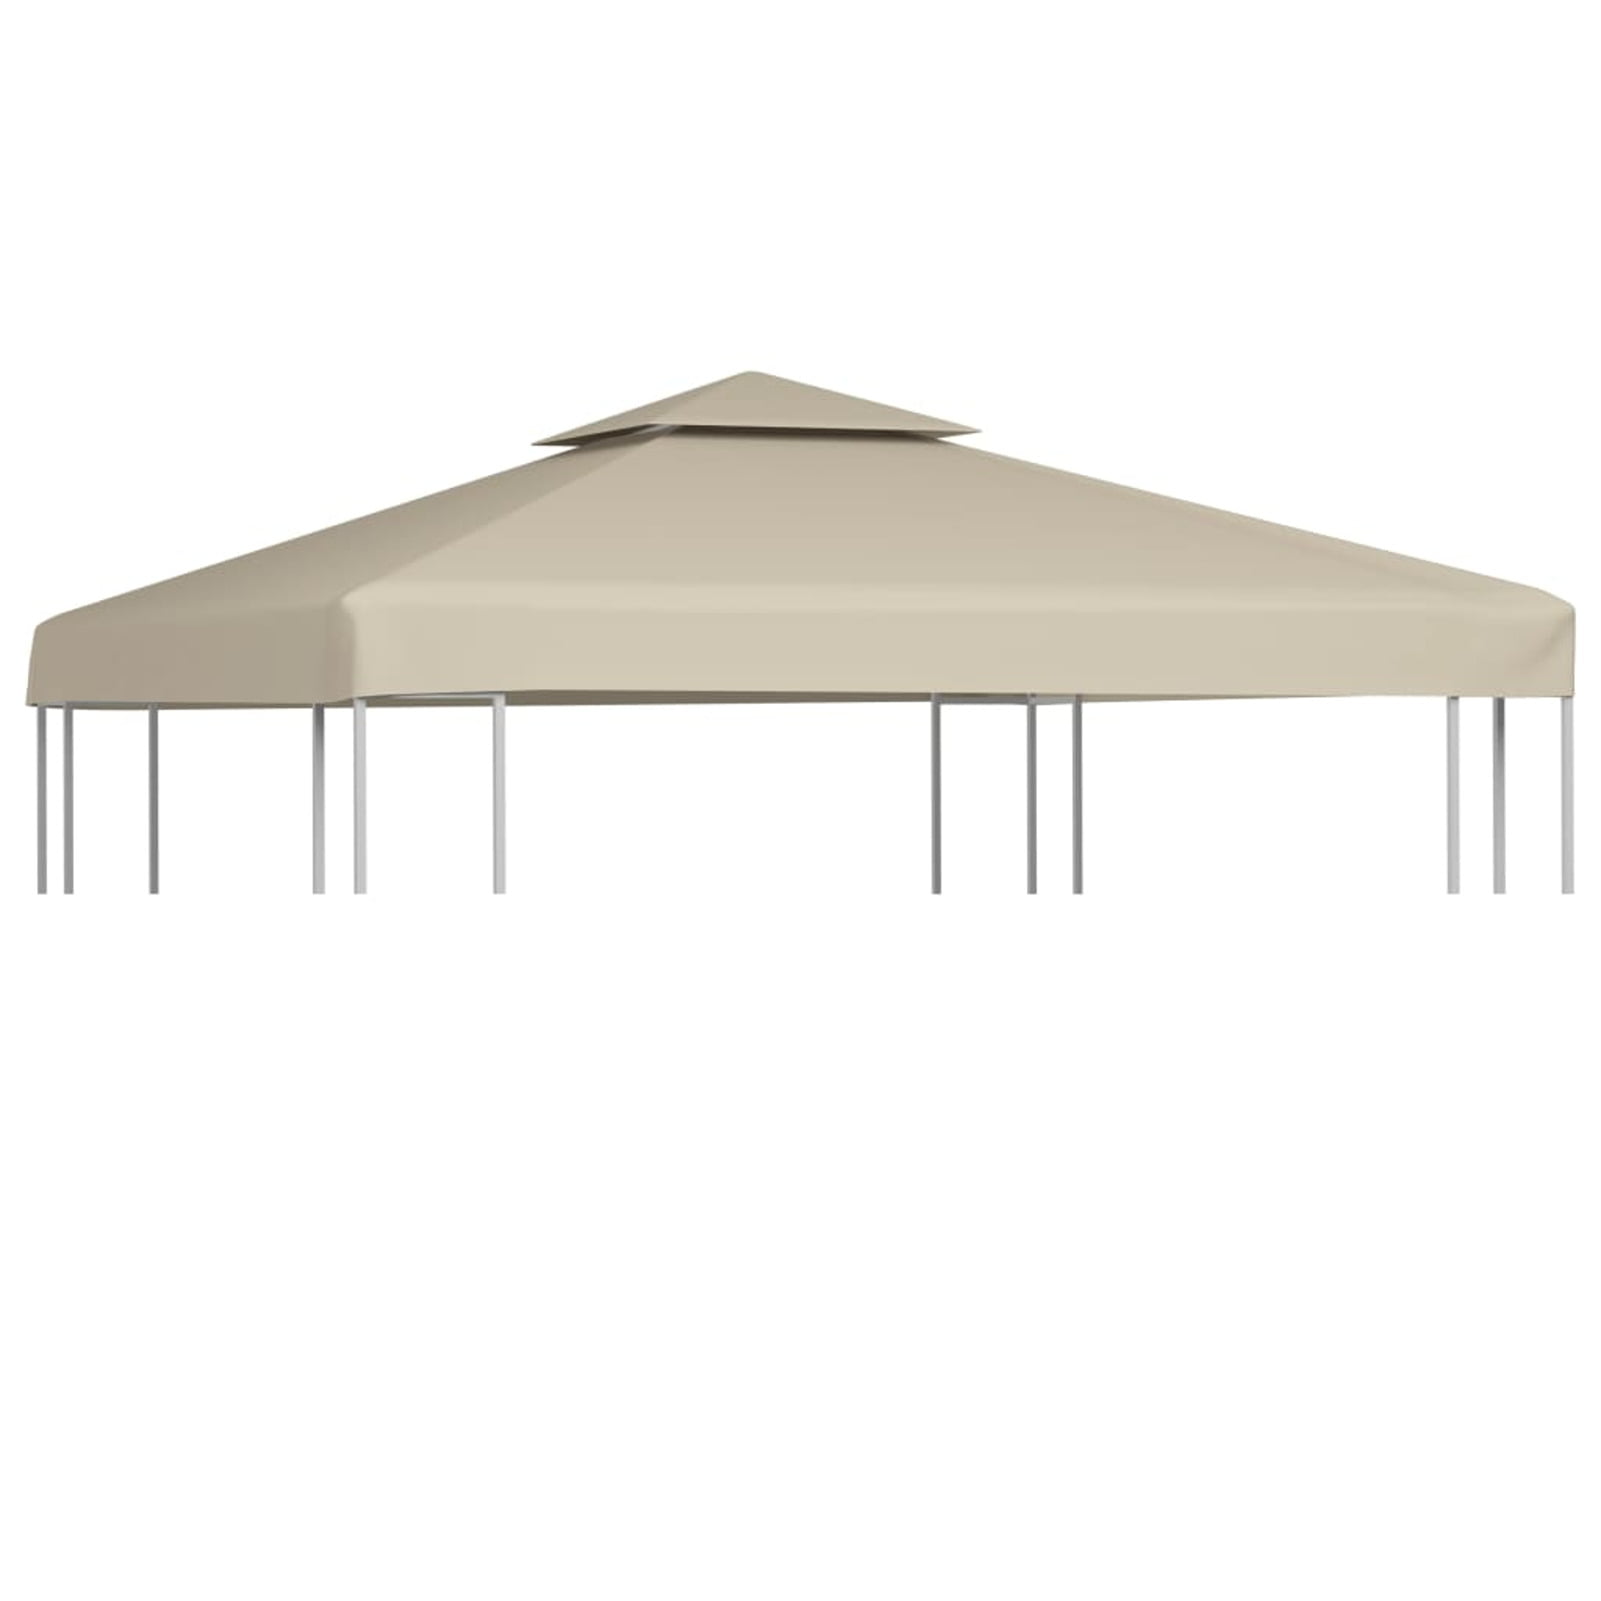 Details about   ABCCANOPY Grill Shelter Replacement Canopy Roof ONLY FIT for Gazebo Model Brown